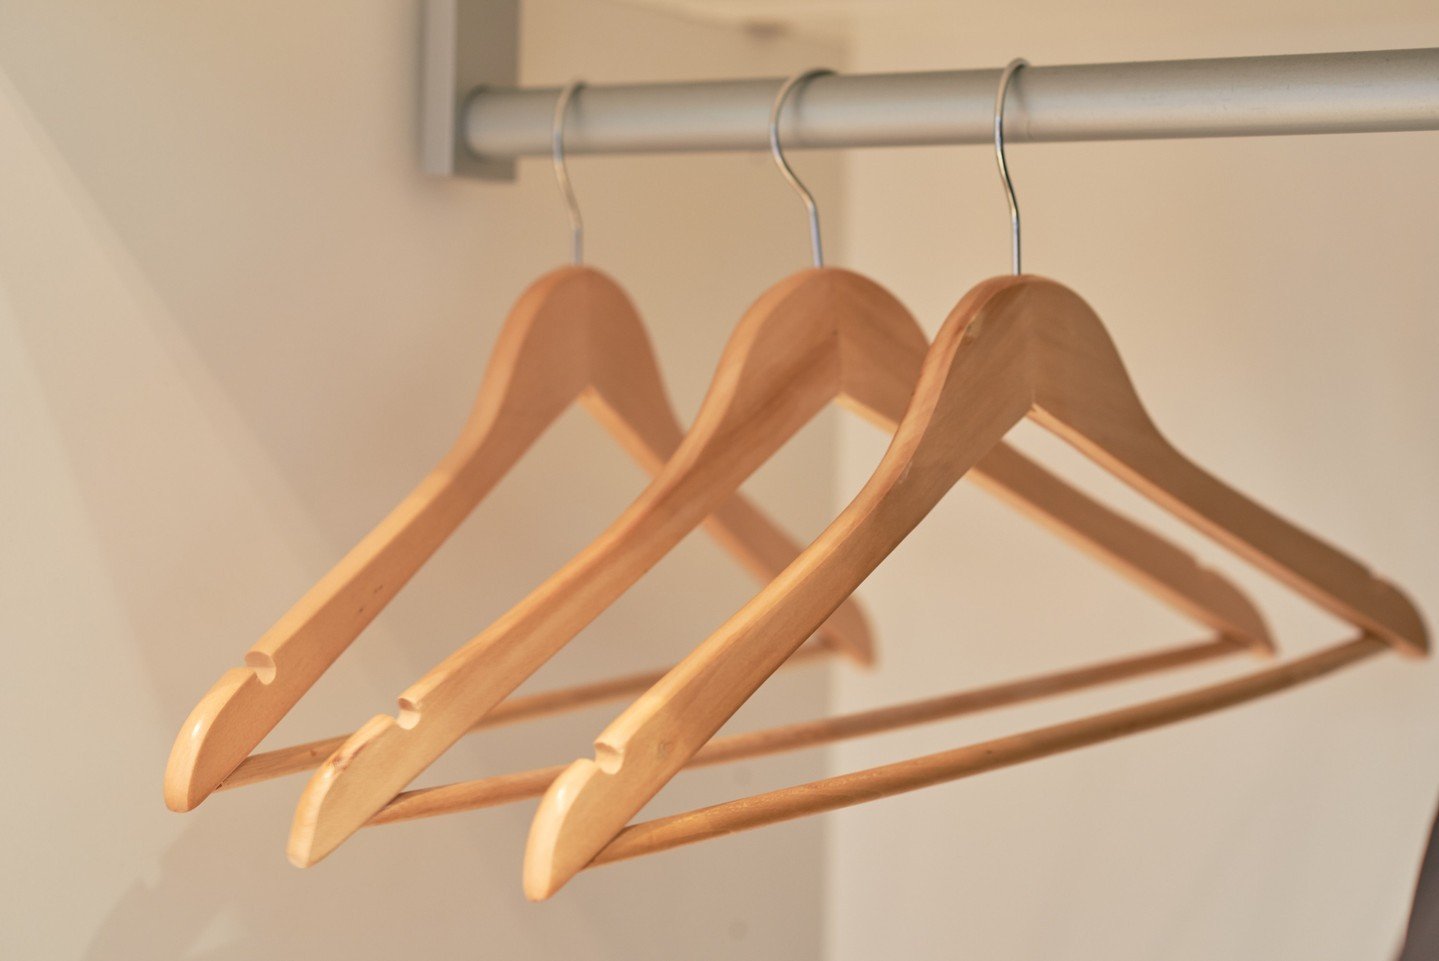 You might not think a lot about hangers--but professional organizers sure do! ⁣
⁣
Wire hangers--please no! ⁣
⁣
At Mello Spaces we recommend that you use wooden hangers for heavy items like coats. For your everyday essentials, velvet hangers are our g